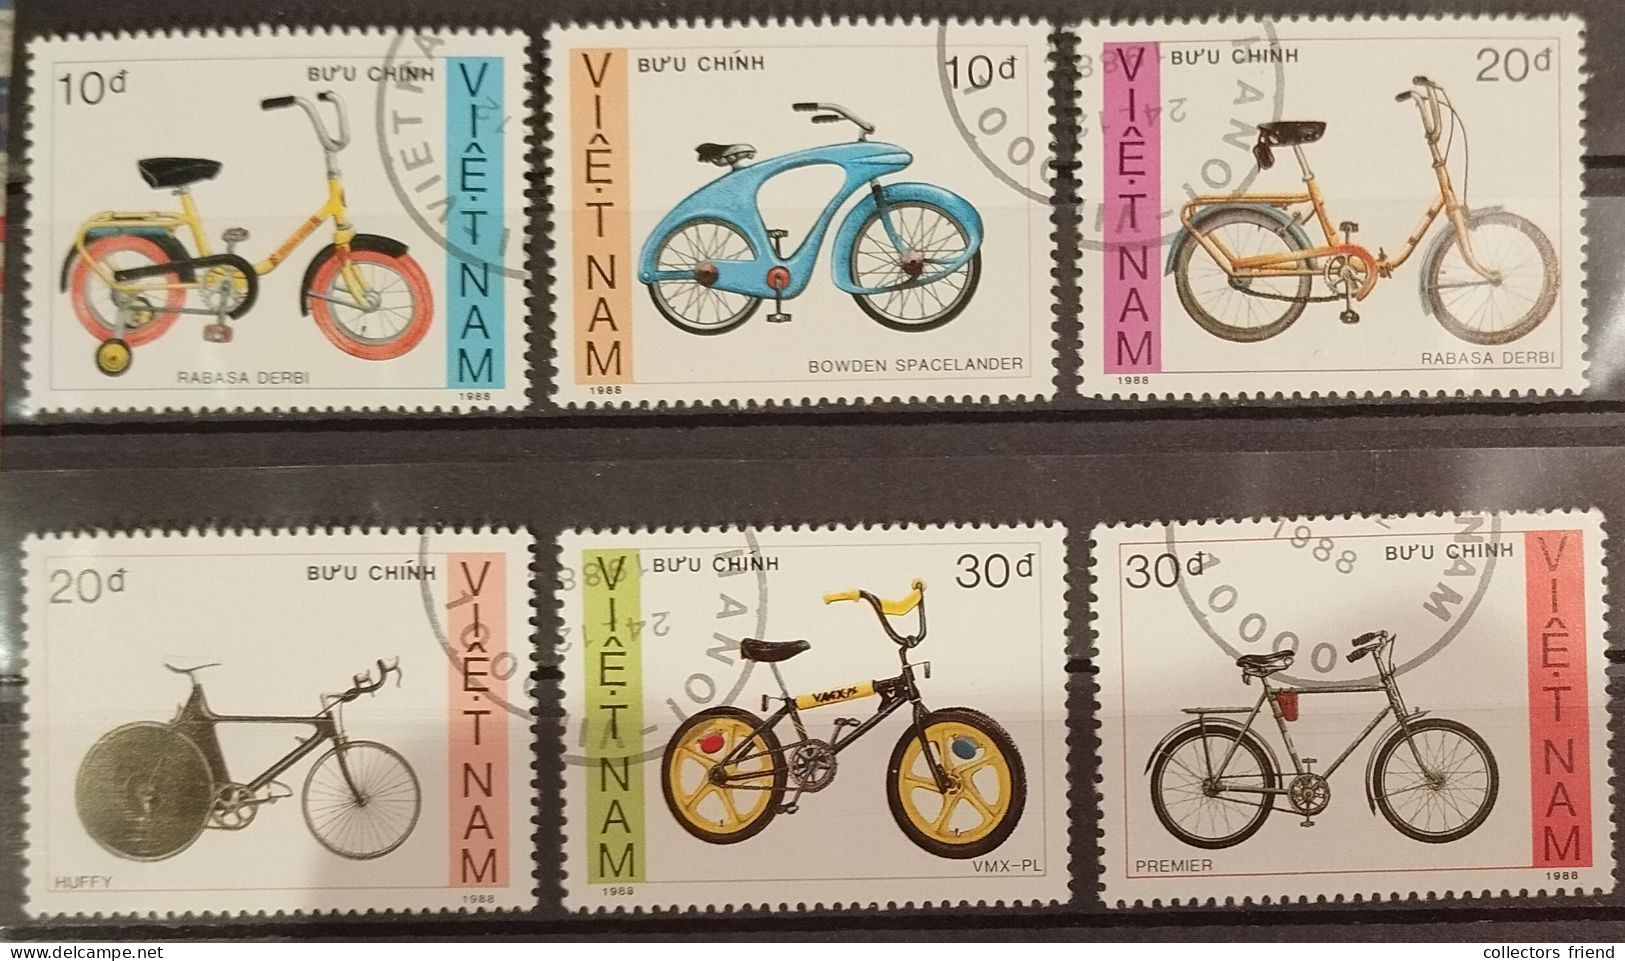 VIETNAM - 1988 - CYCLING BICYCLE - 5 Stamps -  Used - Radsport